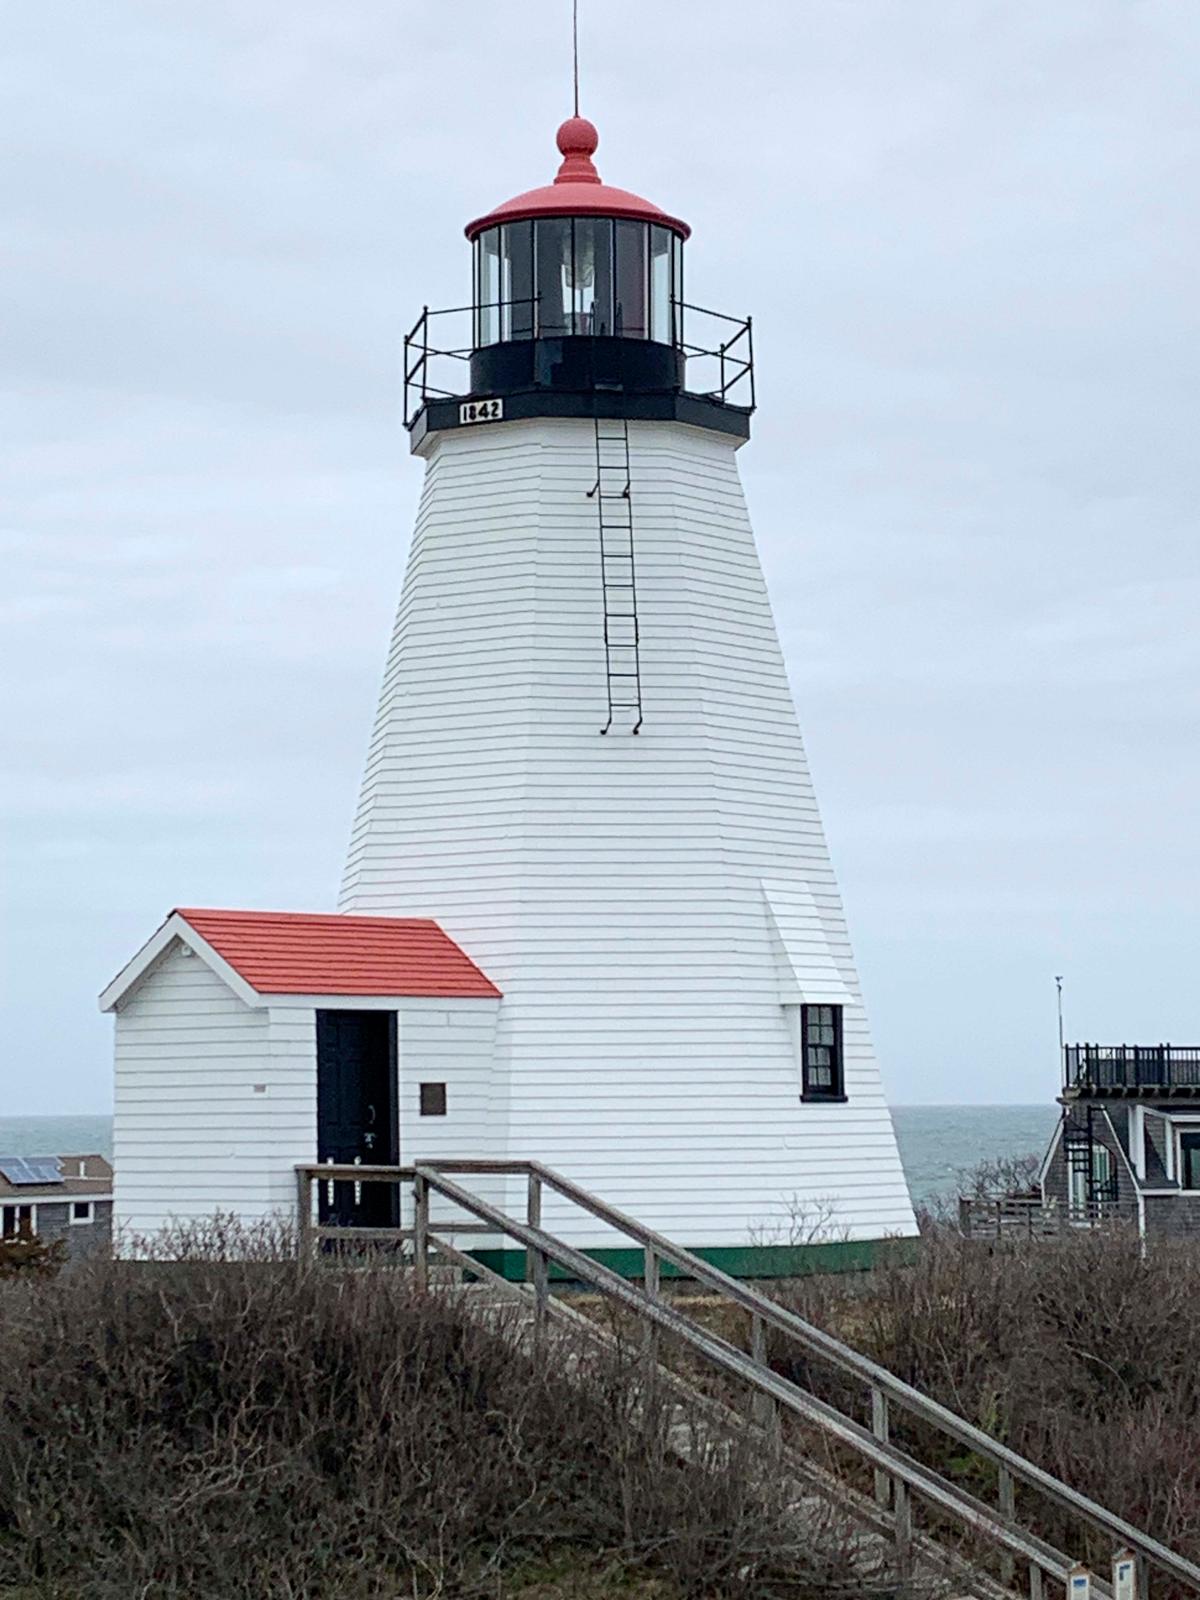 Plymouth Light Station, with an octagonal wooden structure dating to 1842, stands near Cape Cod Bay and Plymouth Bay in Plymouth, Massachusetts. (Paul Hughes/General Services Administration via AP)